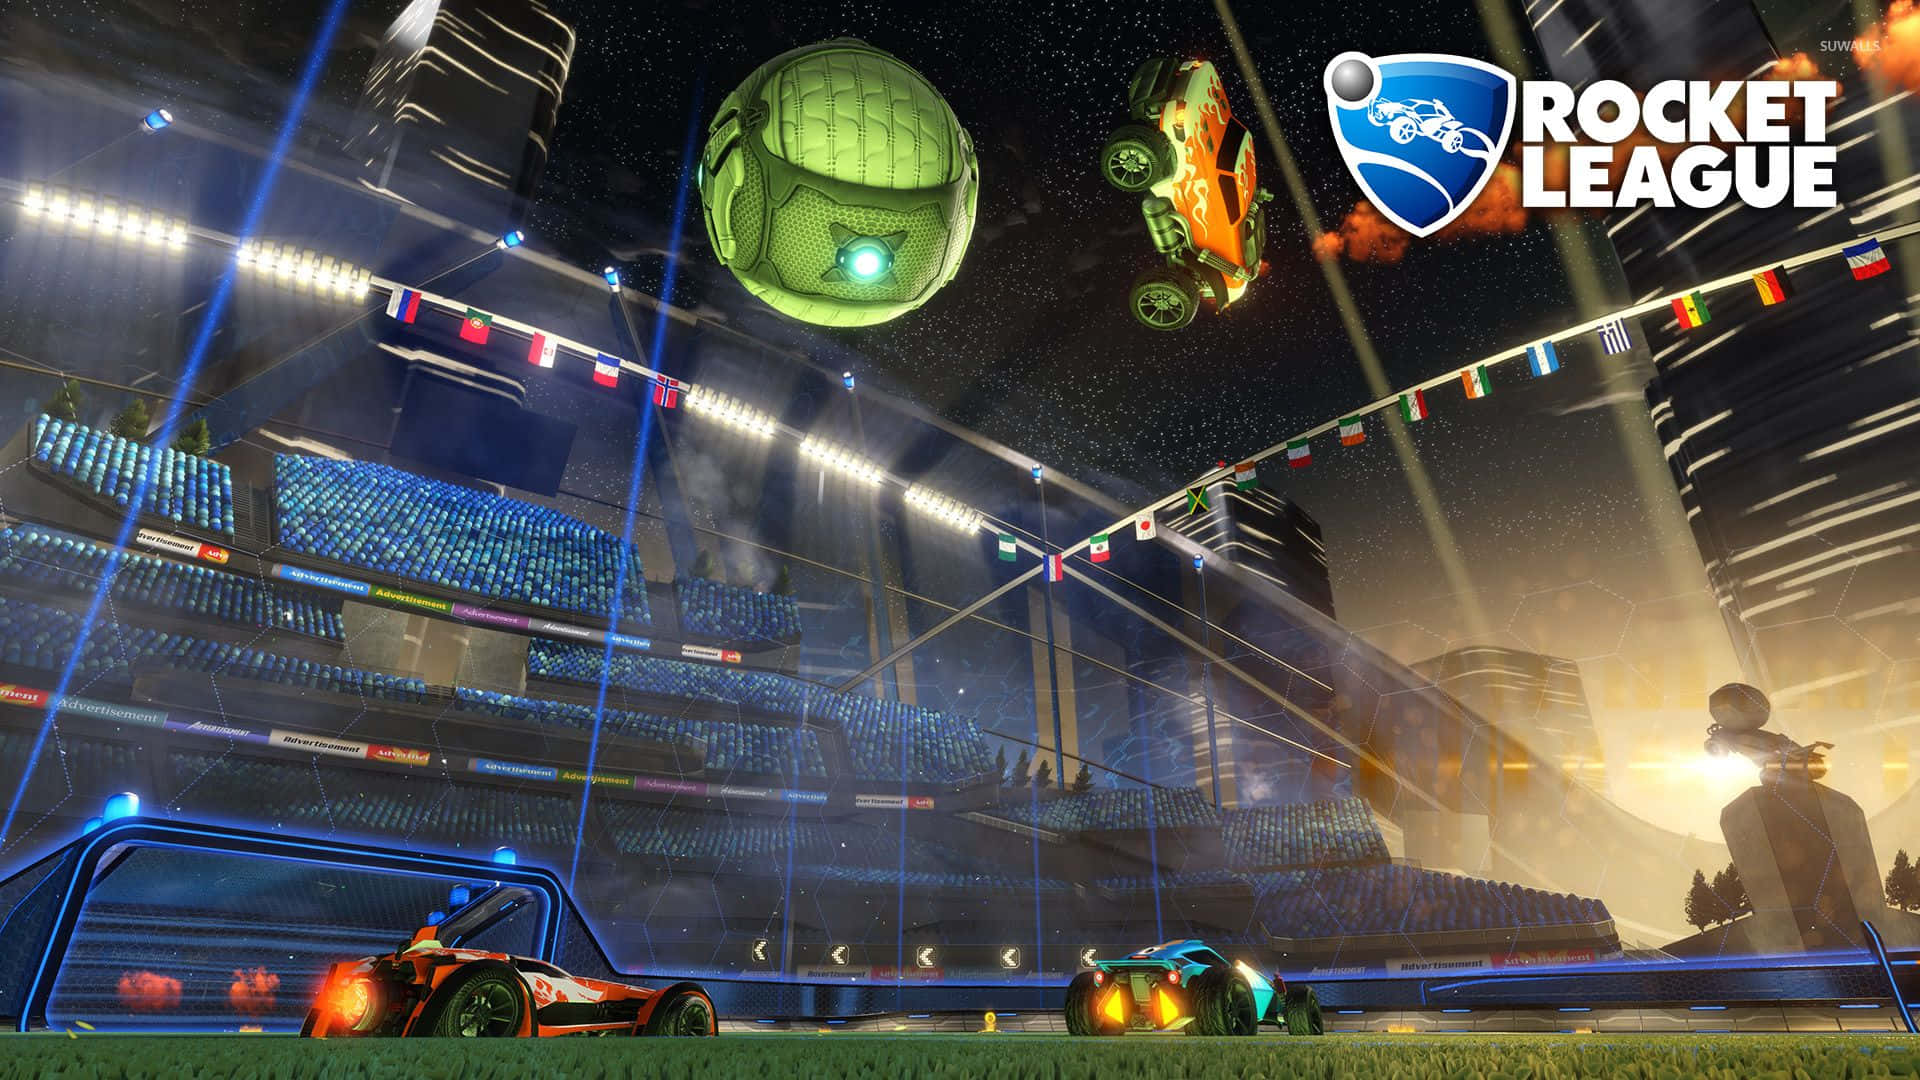 Rocket League Is A High Intensity, Car-driving And Soccer-playing Combination Of Esports Background